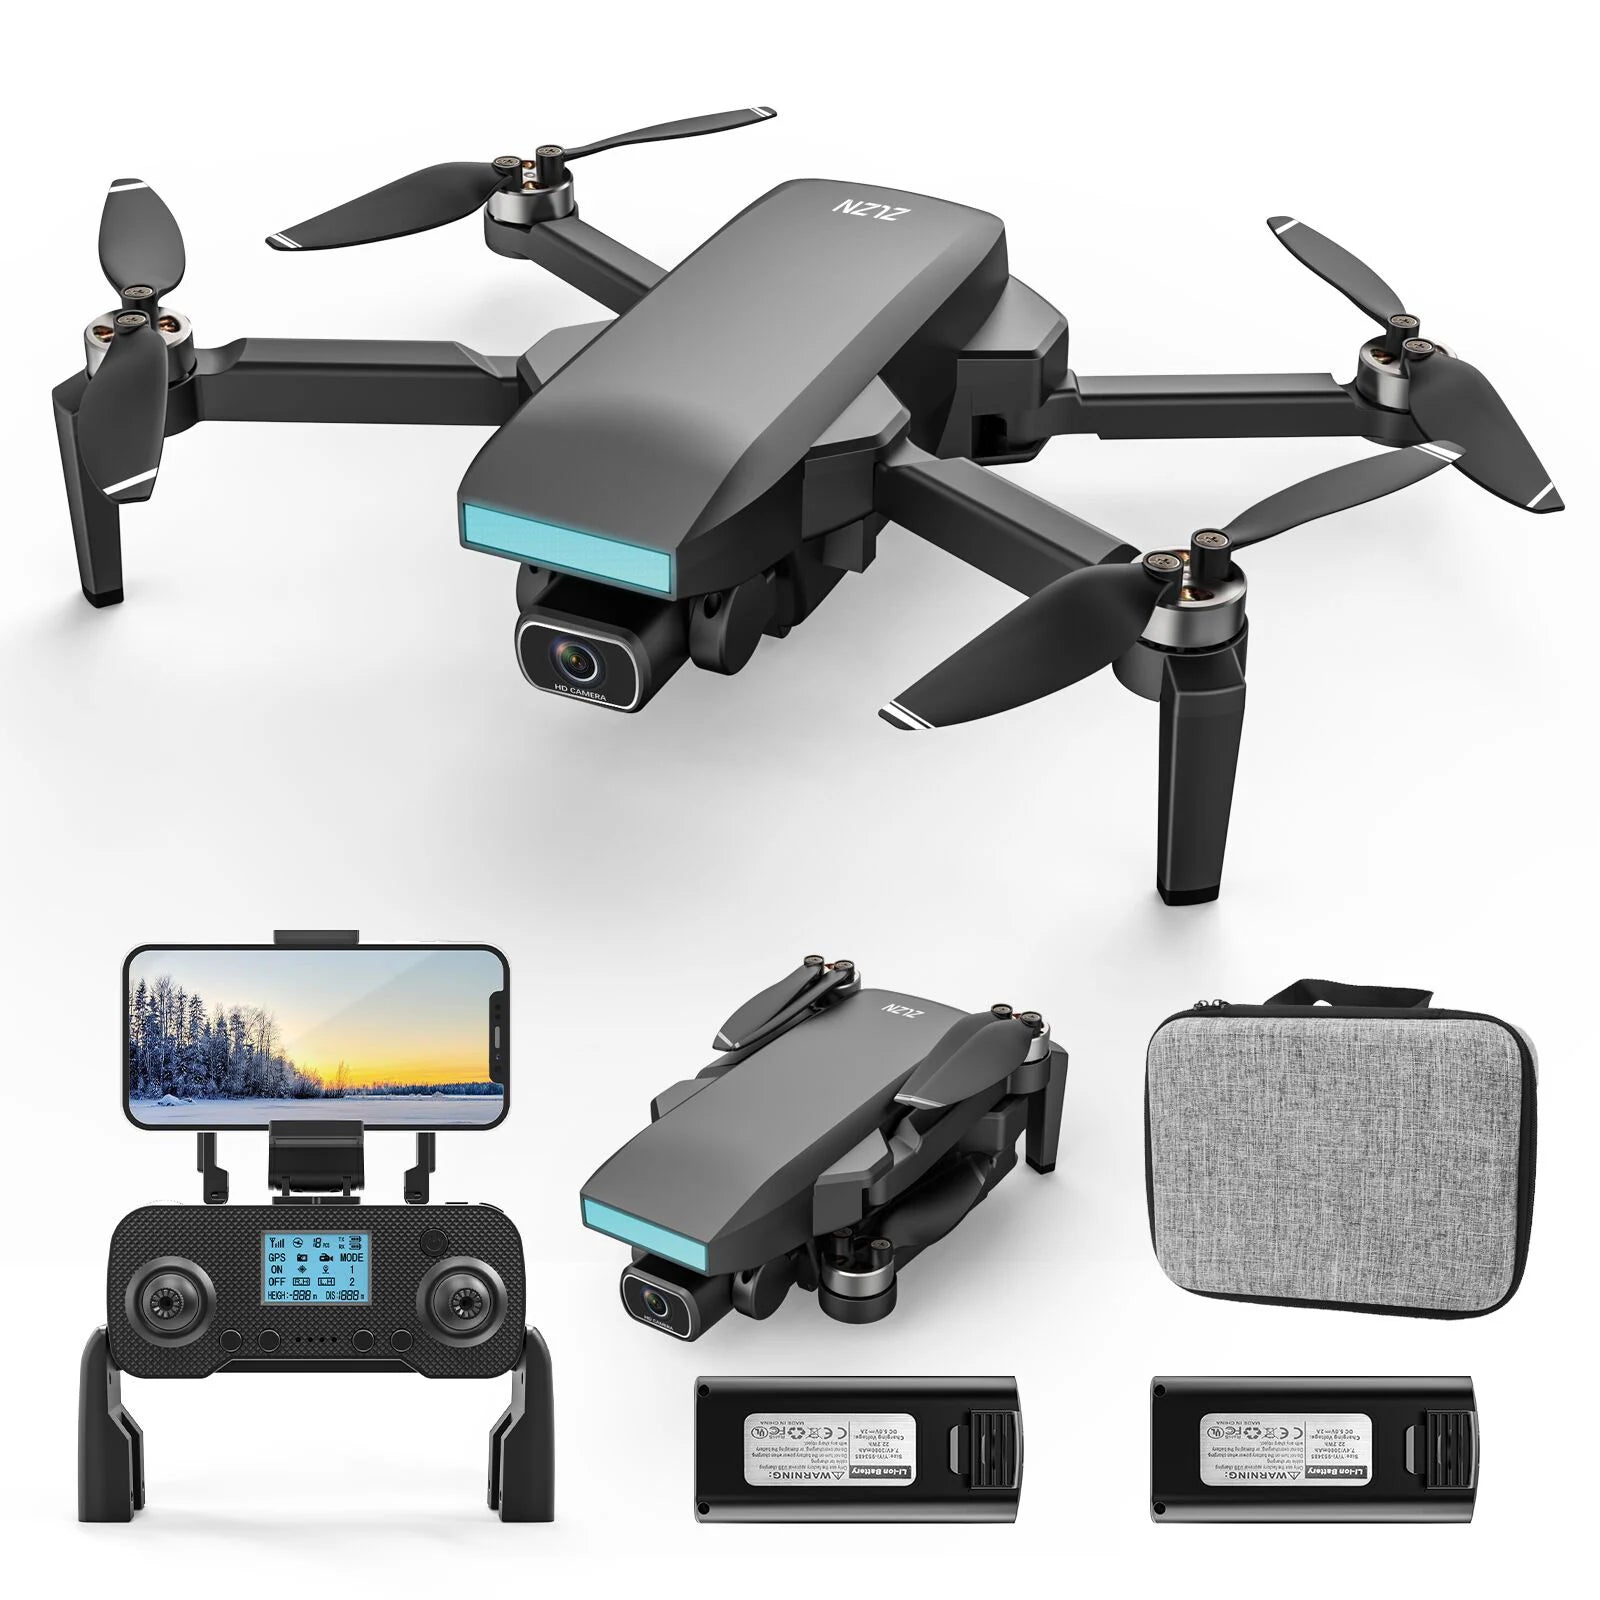 ZLL SG107 Pro Drone, sg107 pro the bright 2" is equipped with an intelligent